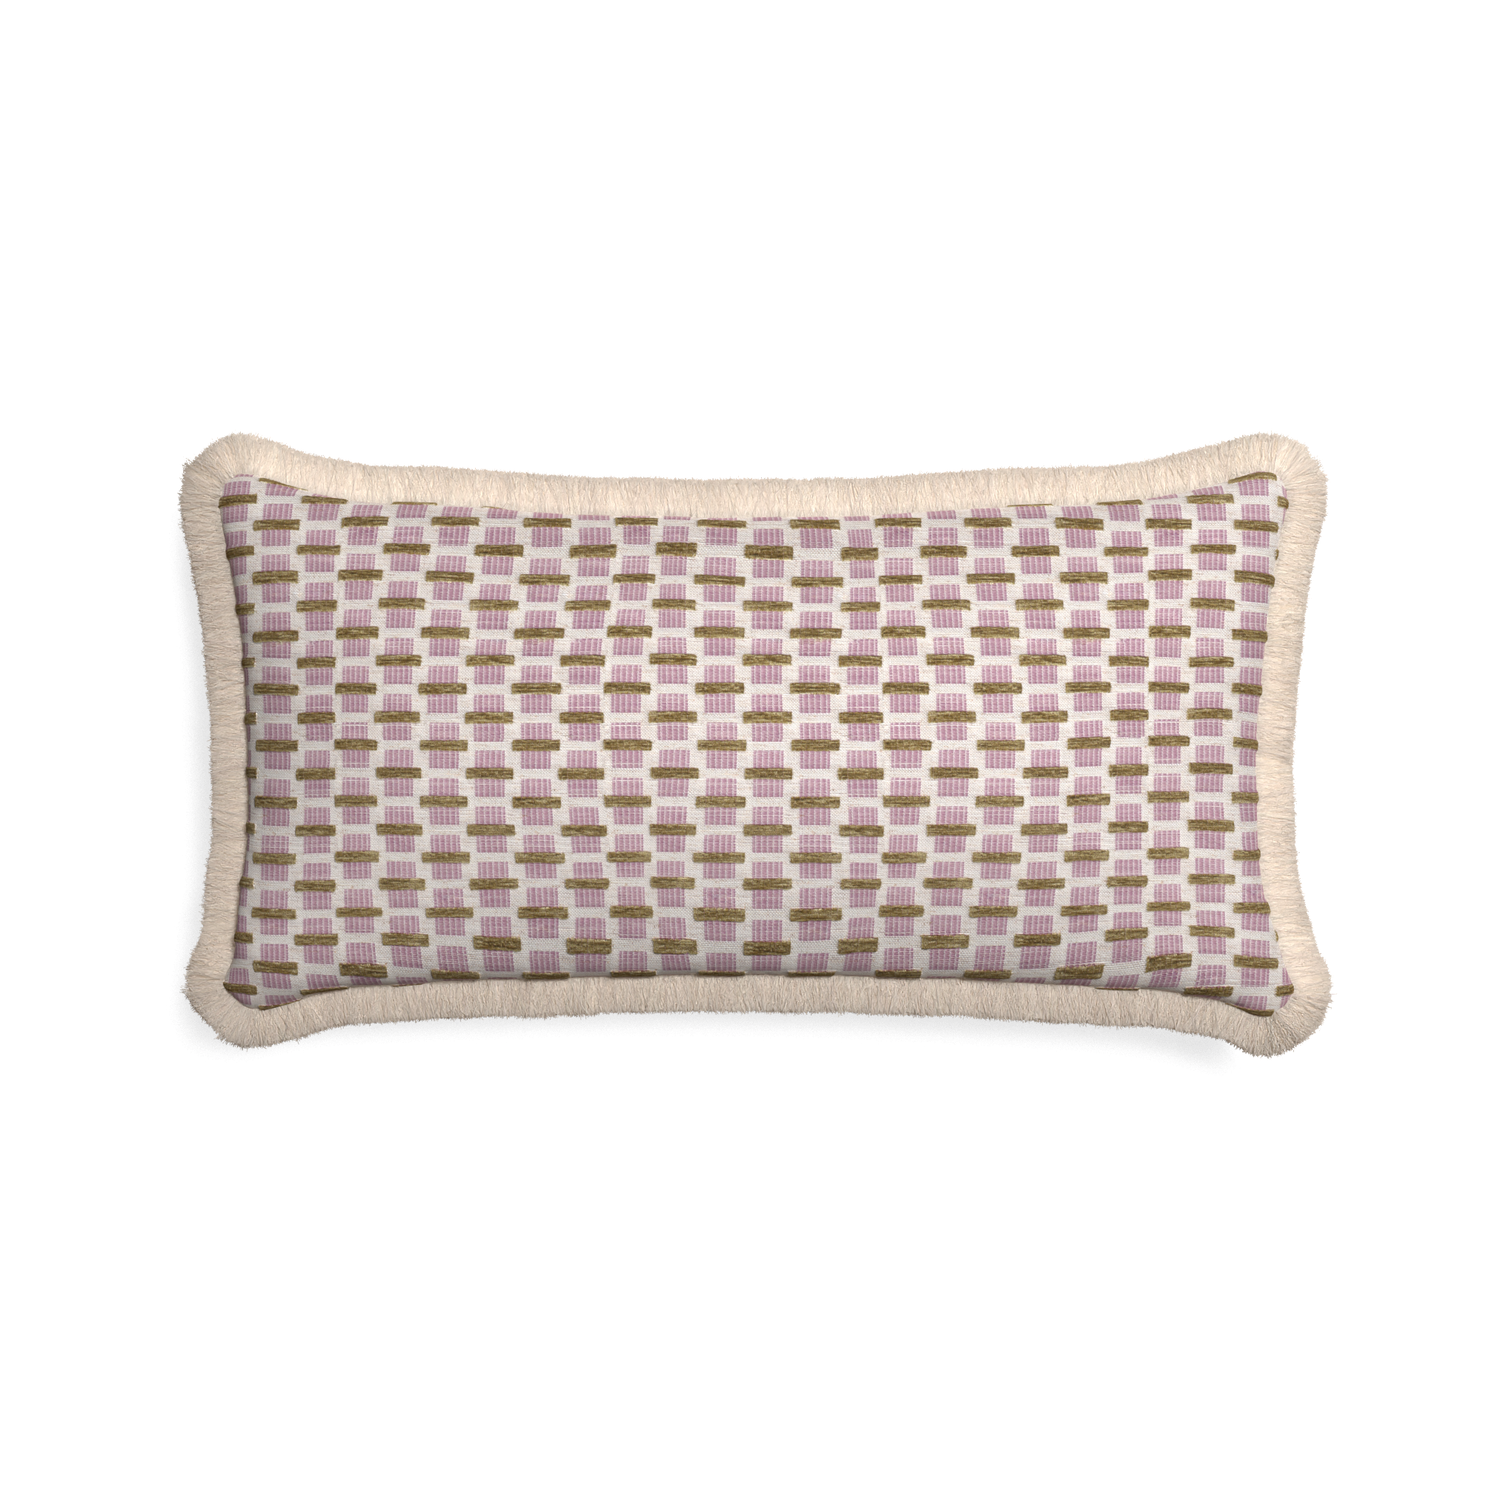 Midi-lumbar willow orchid custom pink geometric chenillepillow with cream fringe on white background